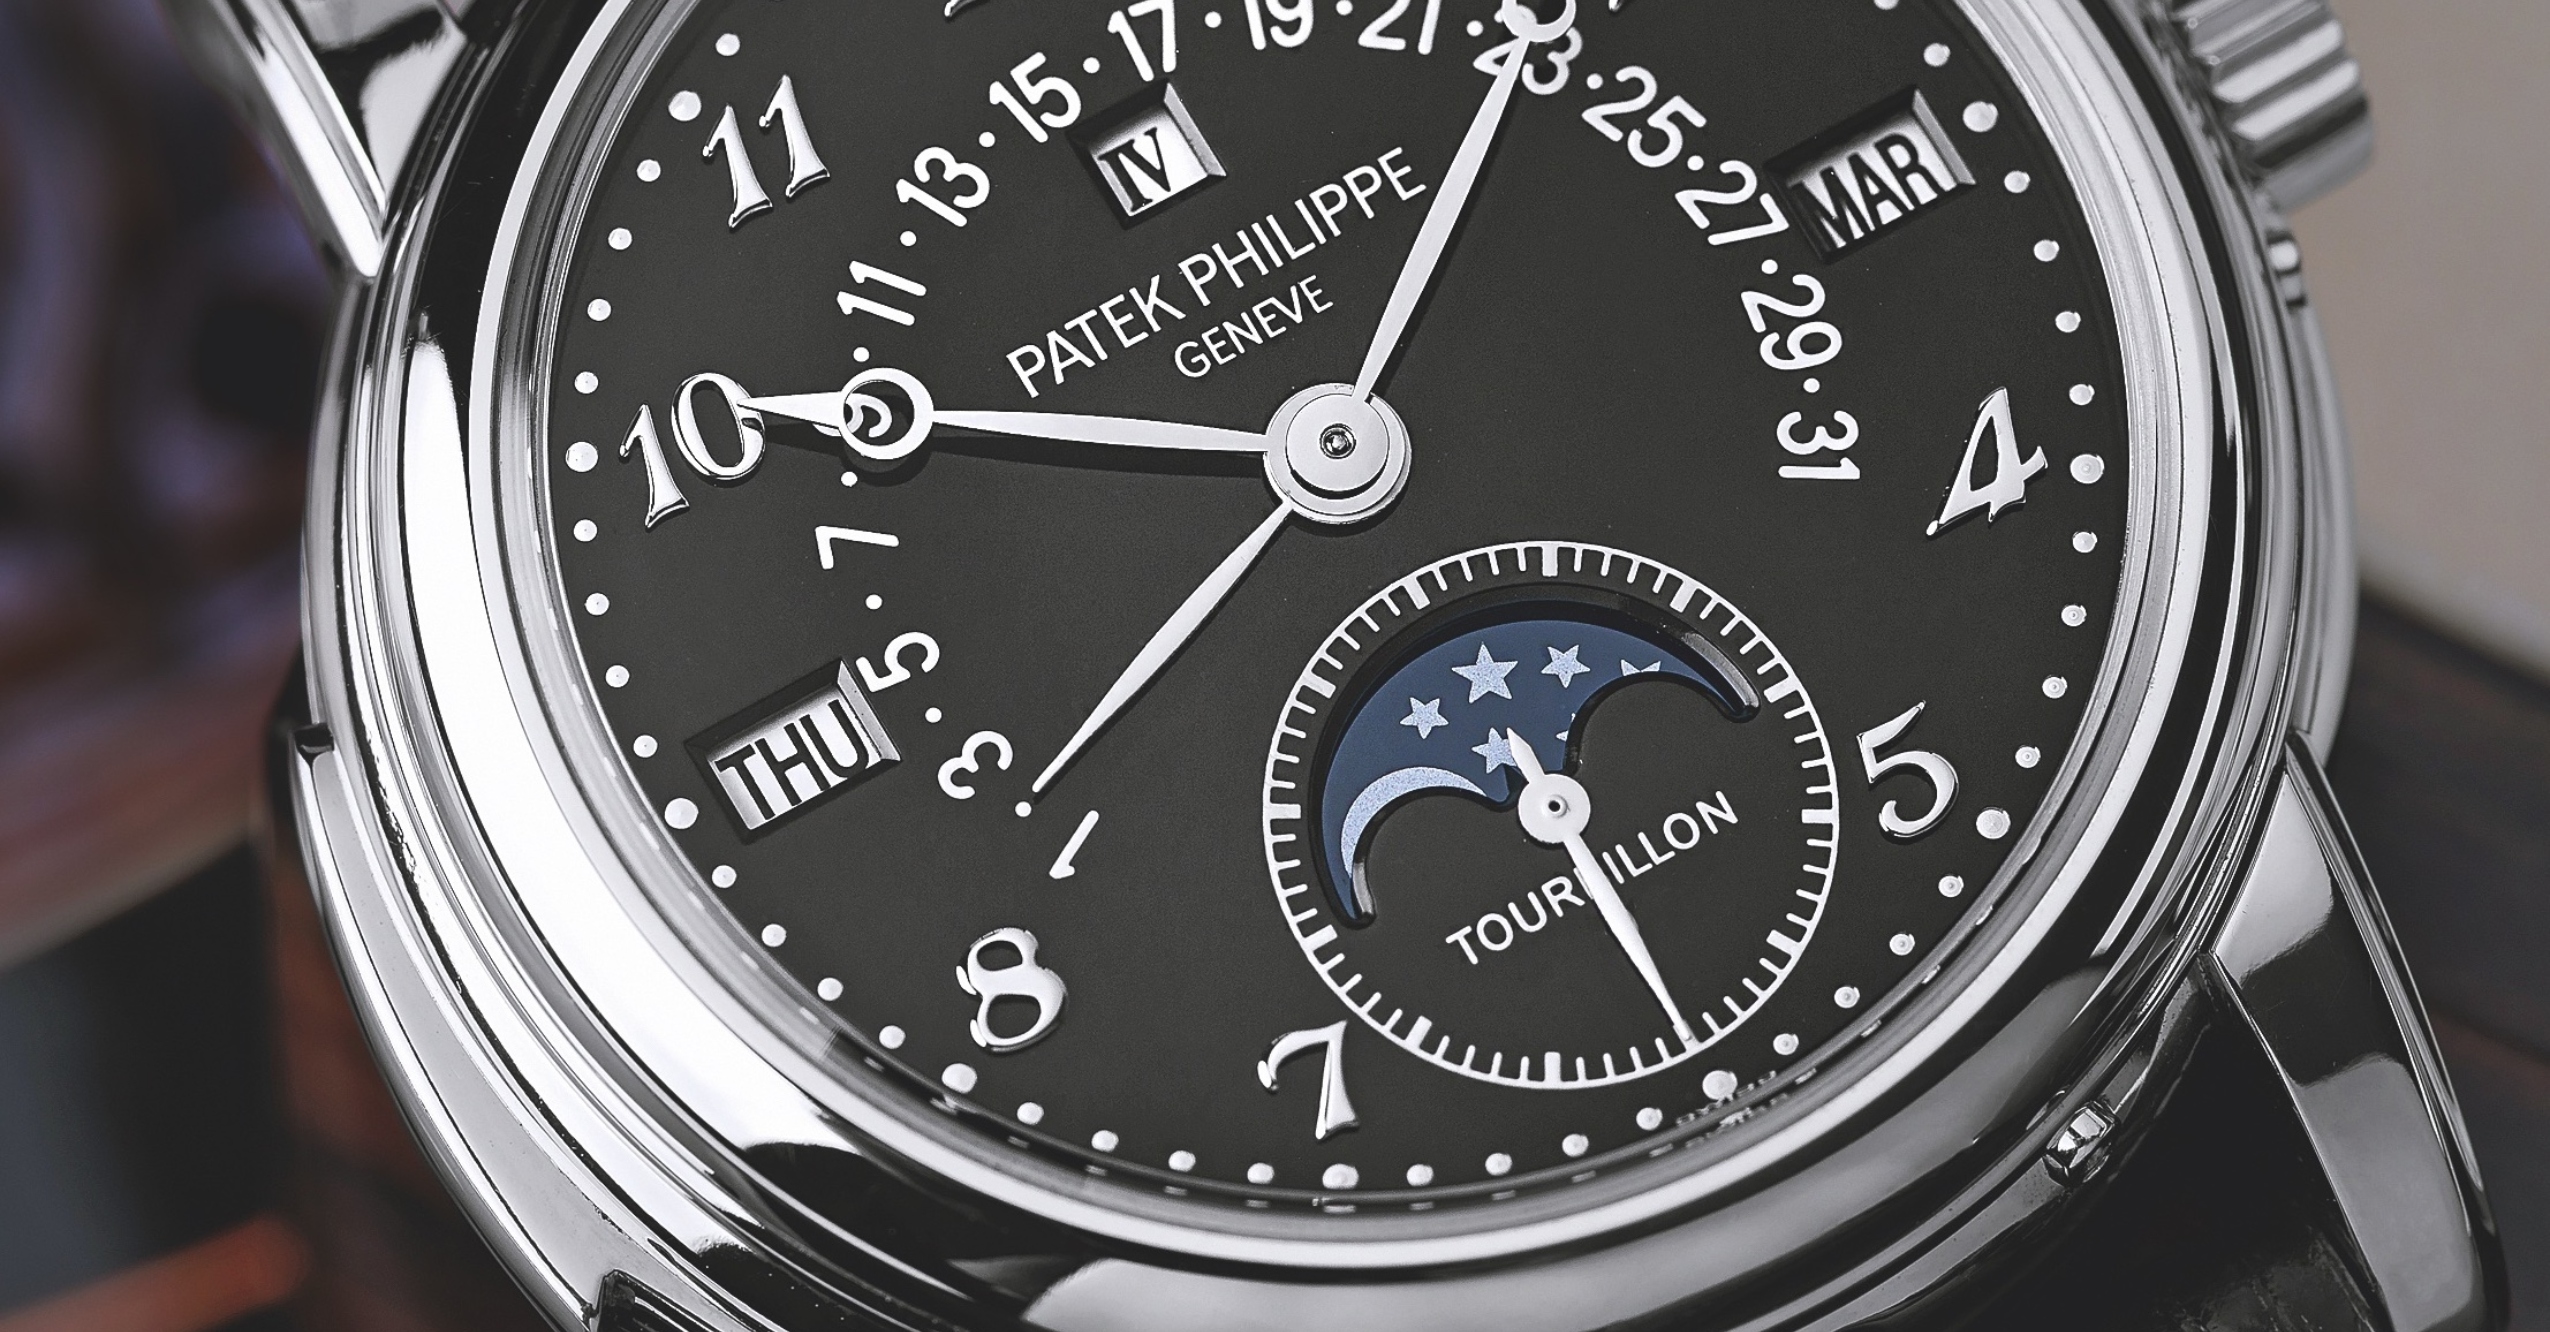 ‘The Connoisseur’s Guide To Fine Timepieces’ Explores European Watch Company